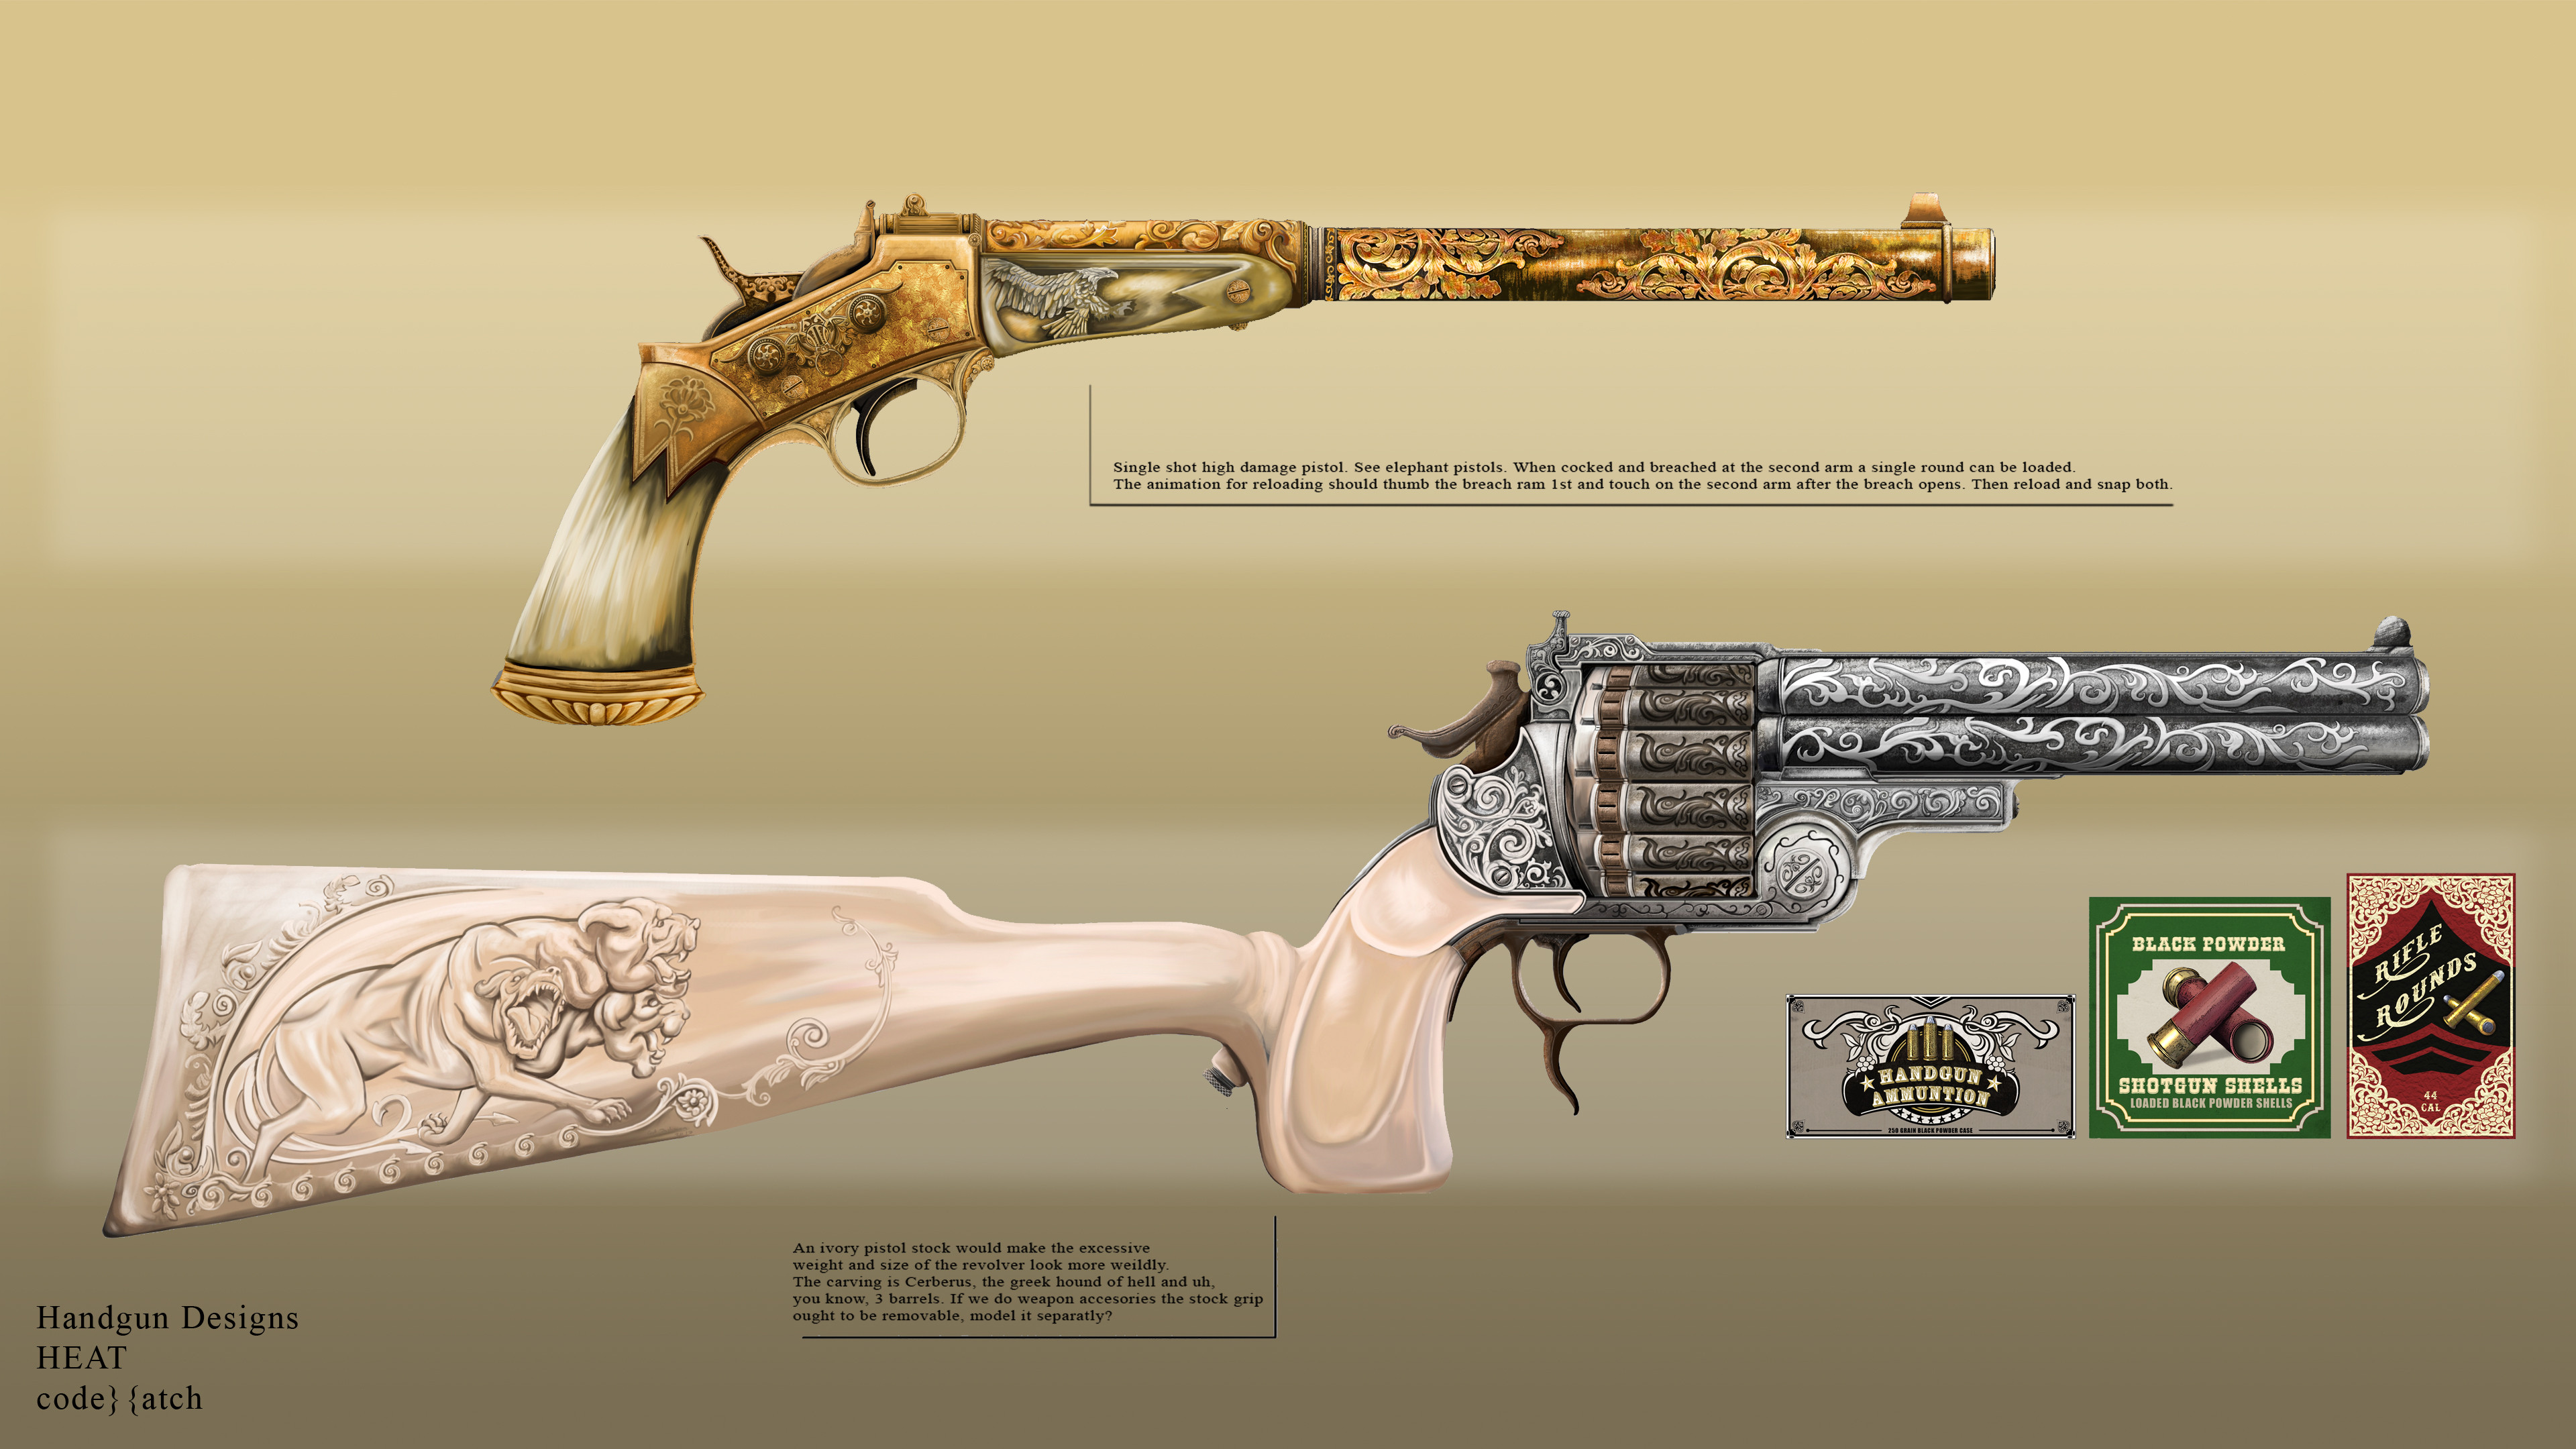 Handguns. The President's Golden Gun is an exclusive weapon provided to power position players. The silver concept gun is for a 3 barrel revolver we did not implement dubbed Cerberus.